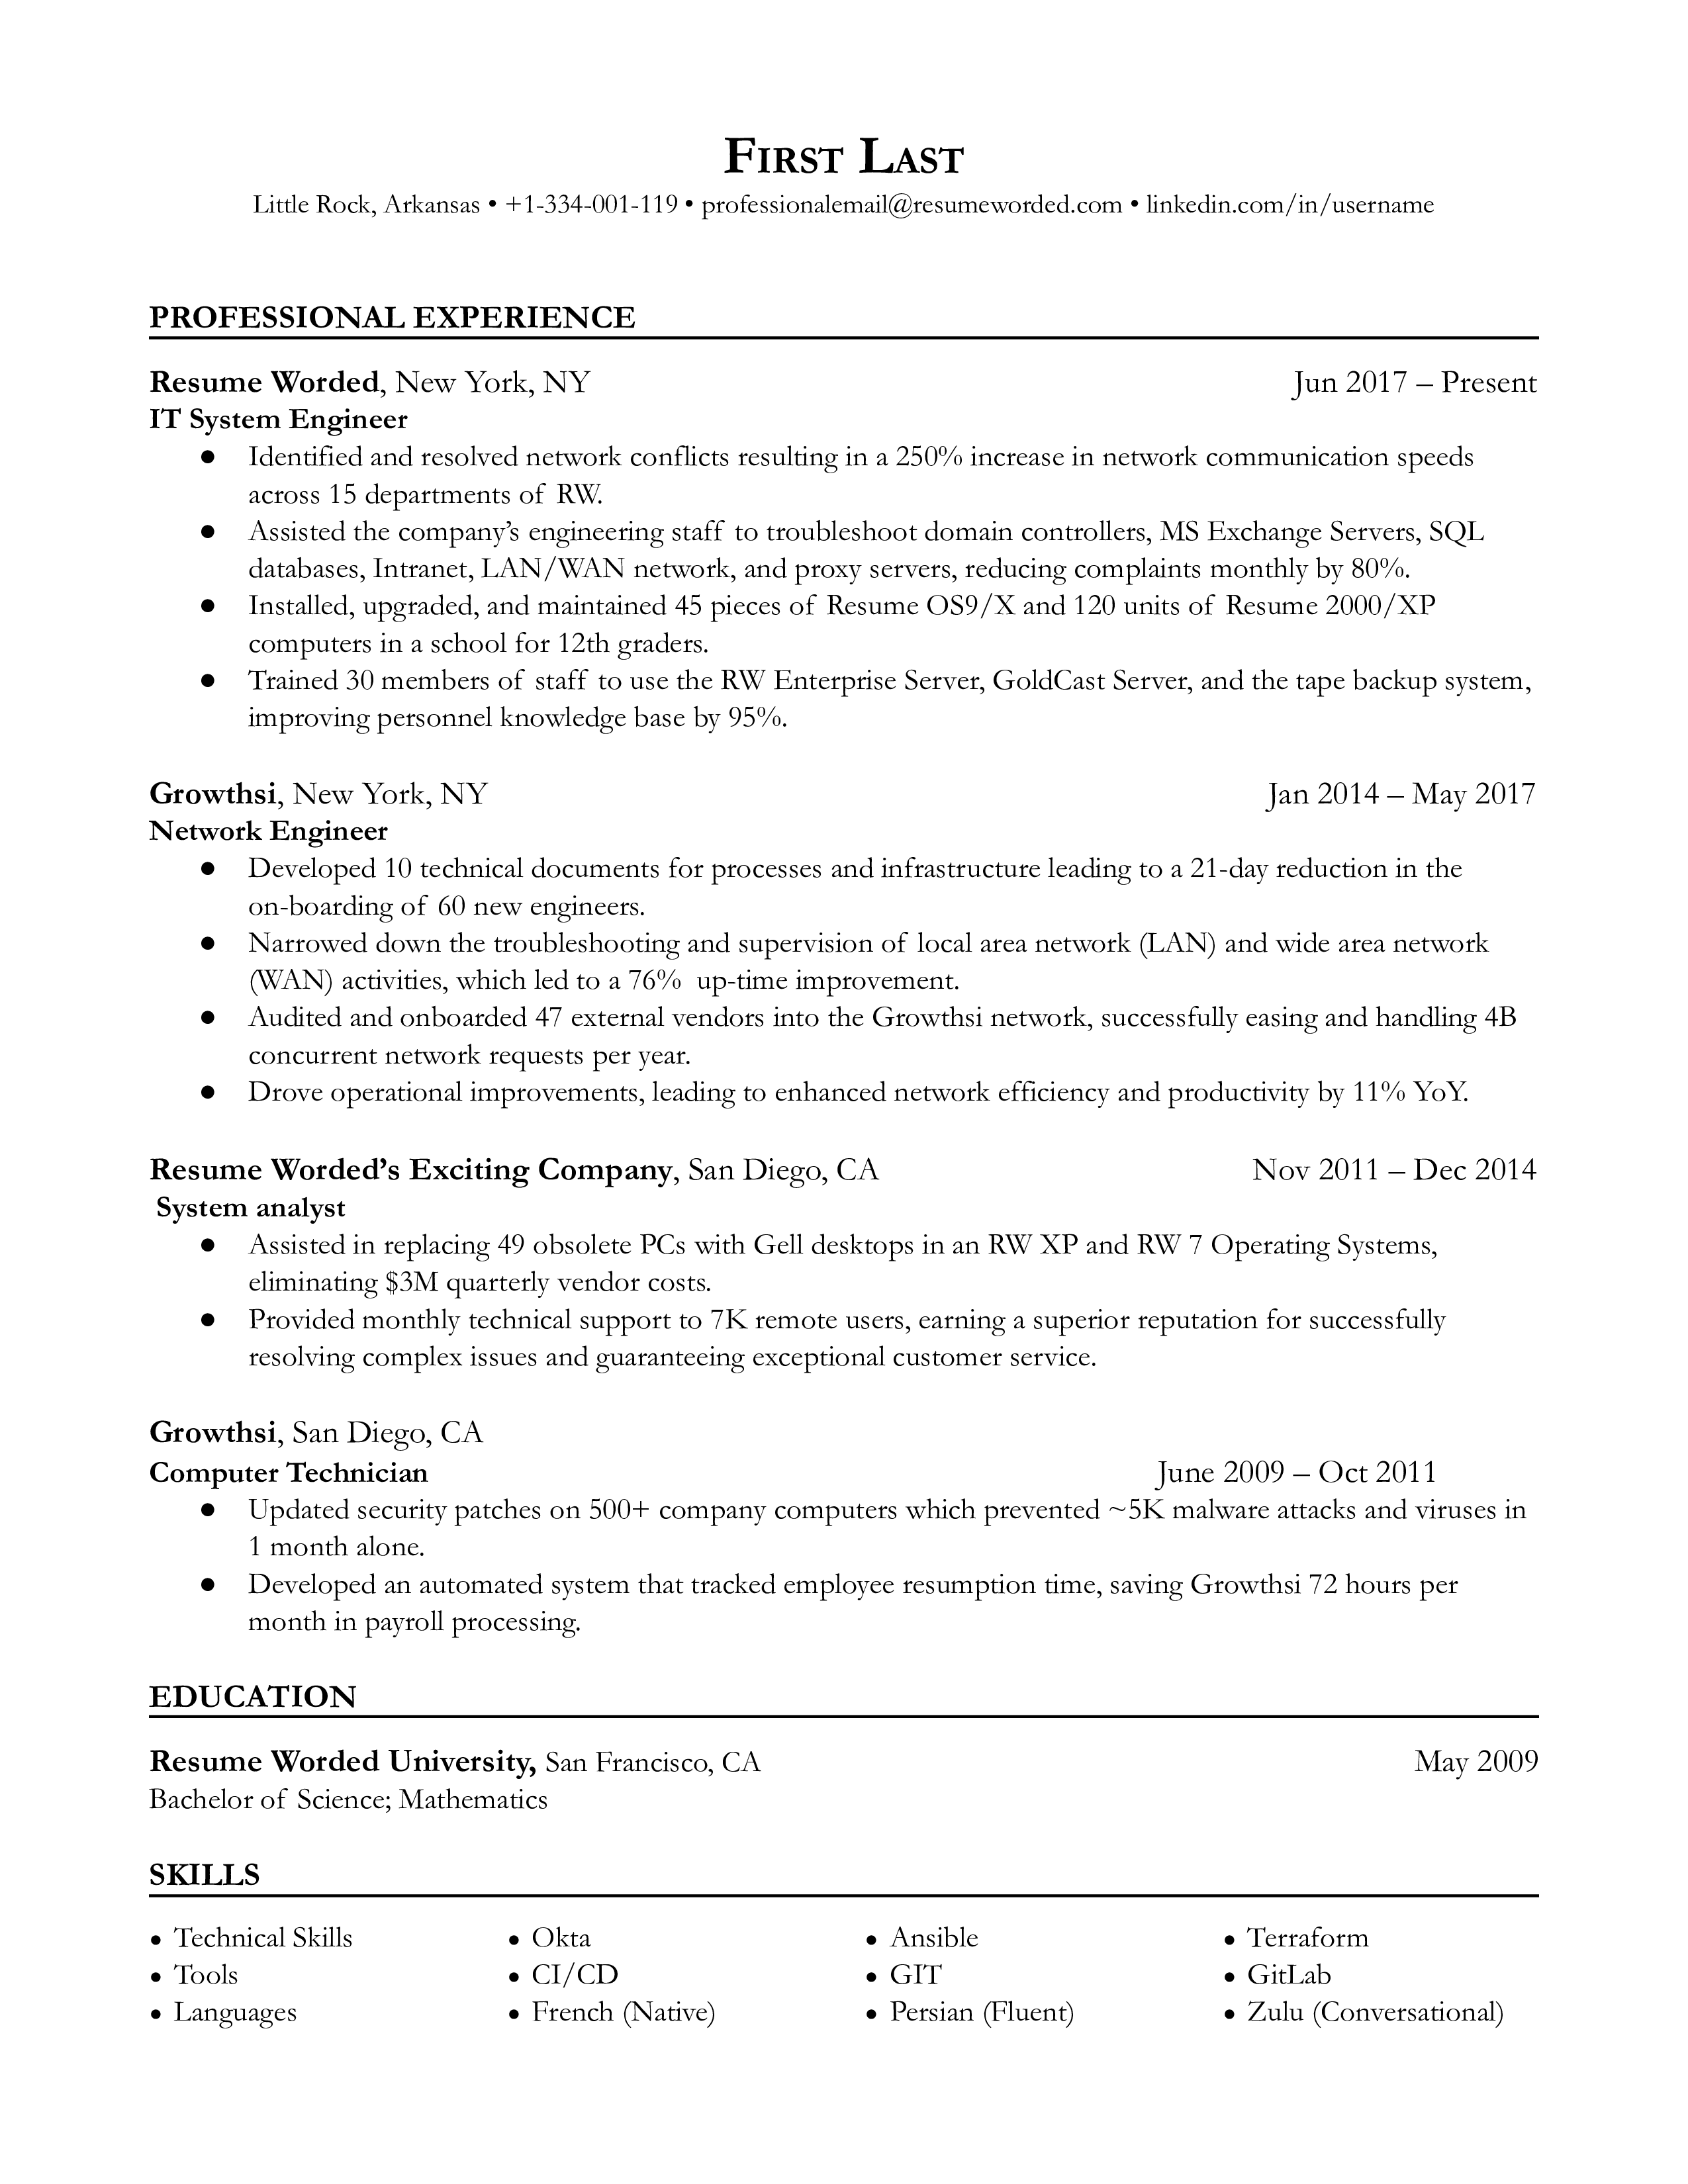 An  IT System Engineer resume template that showcases professional work experience, skills, and education 